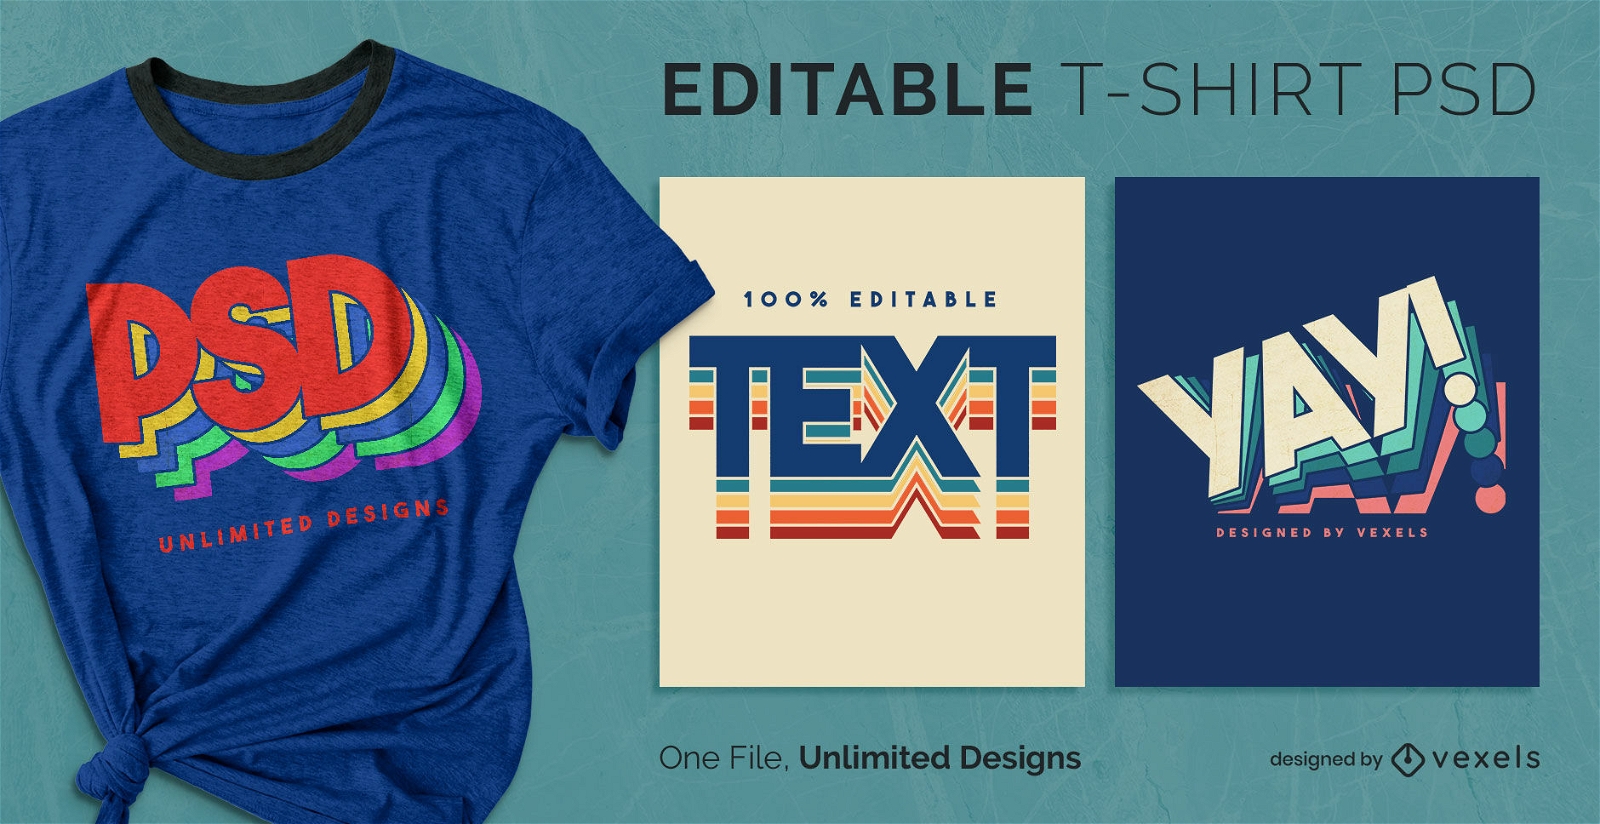 Retro colorful texts scalable t-shirt psd